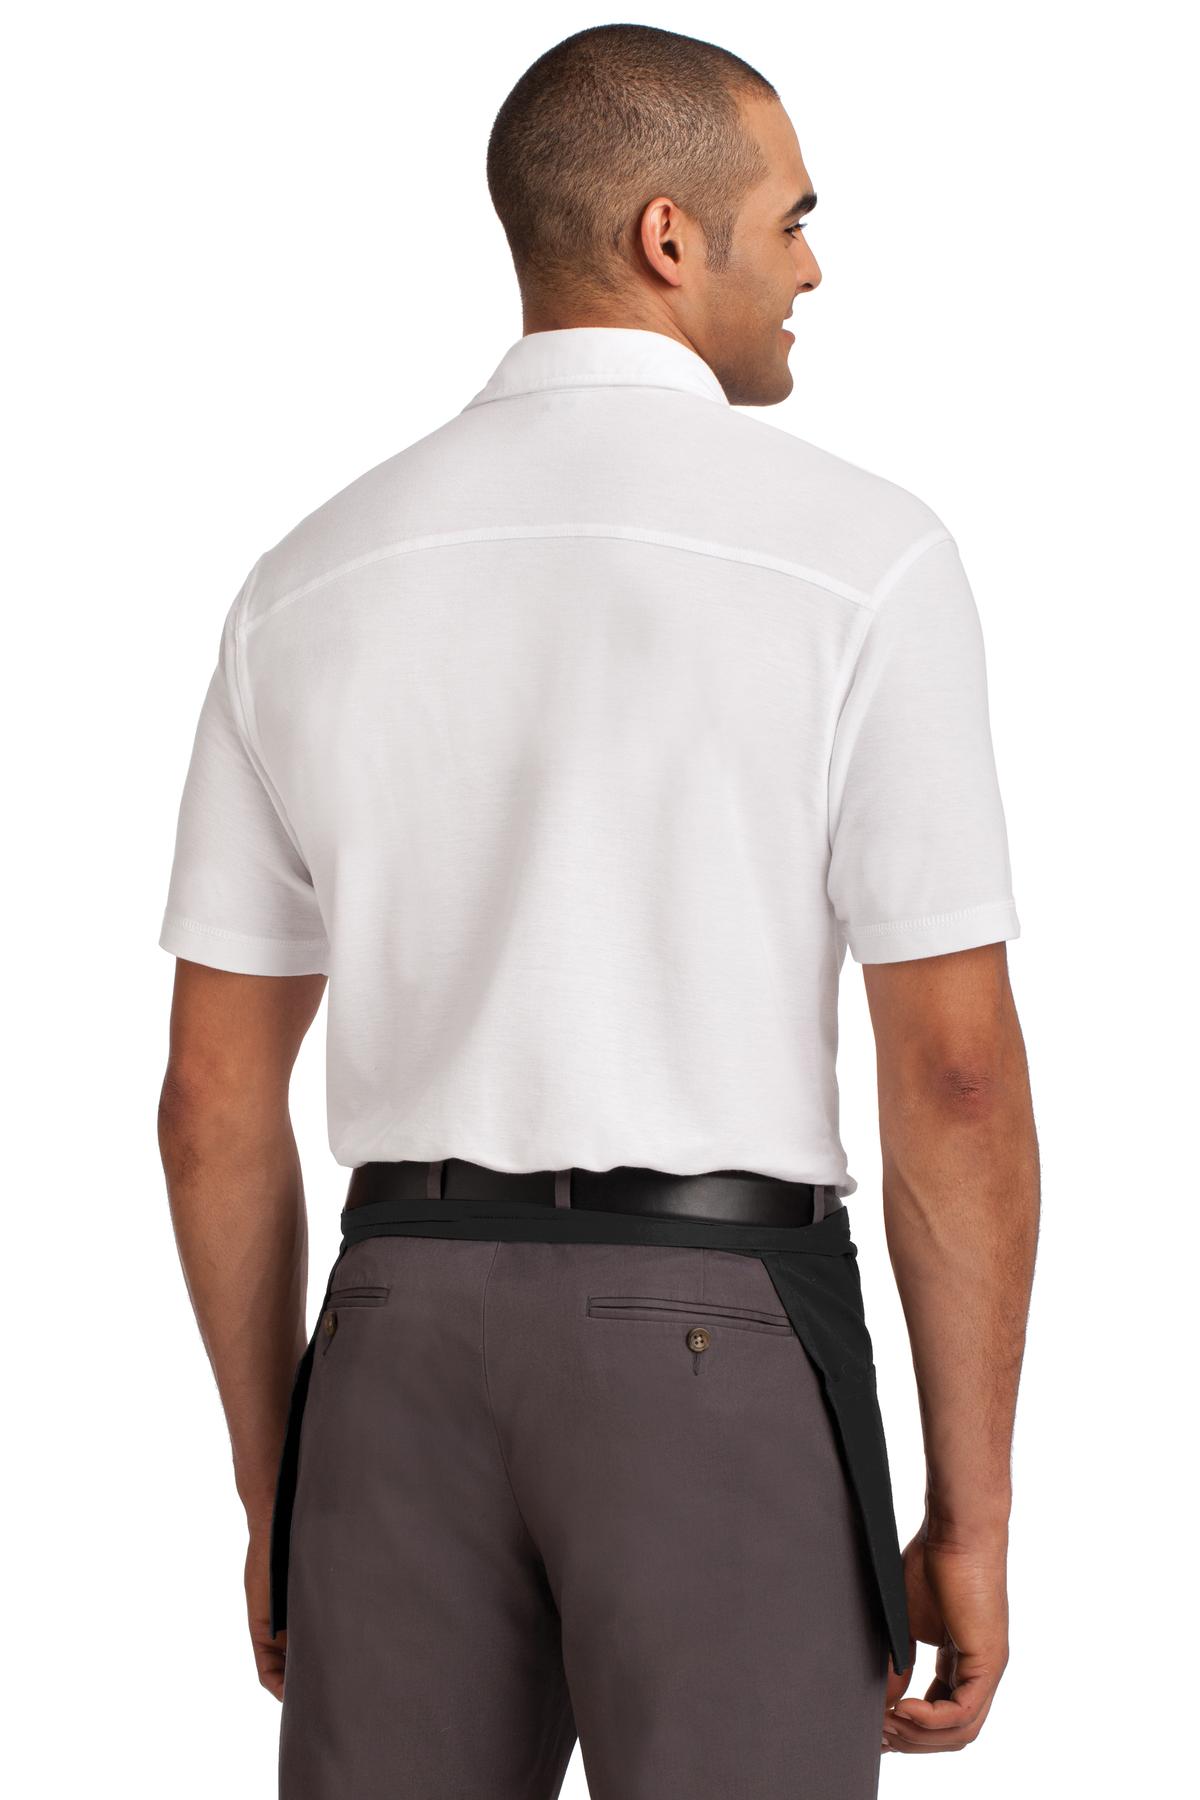 Port Authority® Easy Care Waist Apron with Stain Release. A702 - DFW Impression